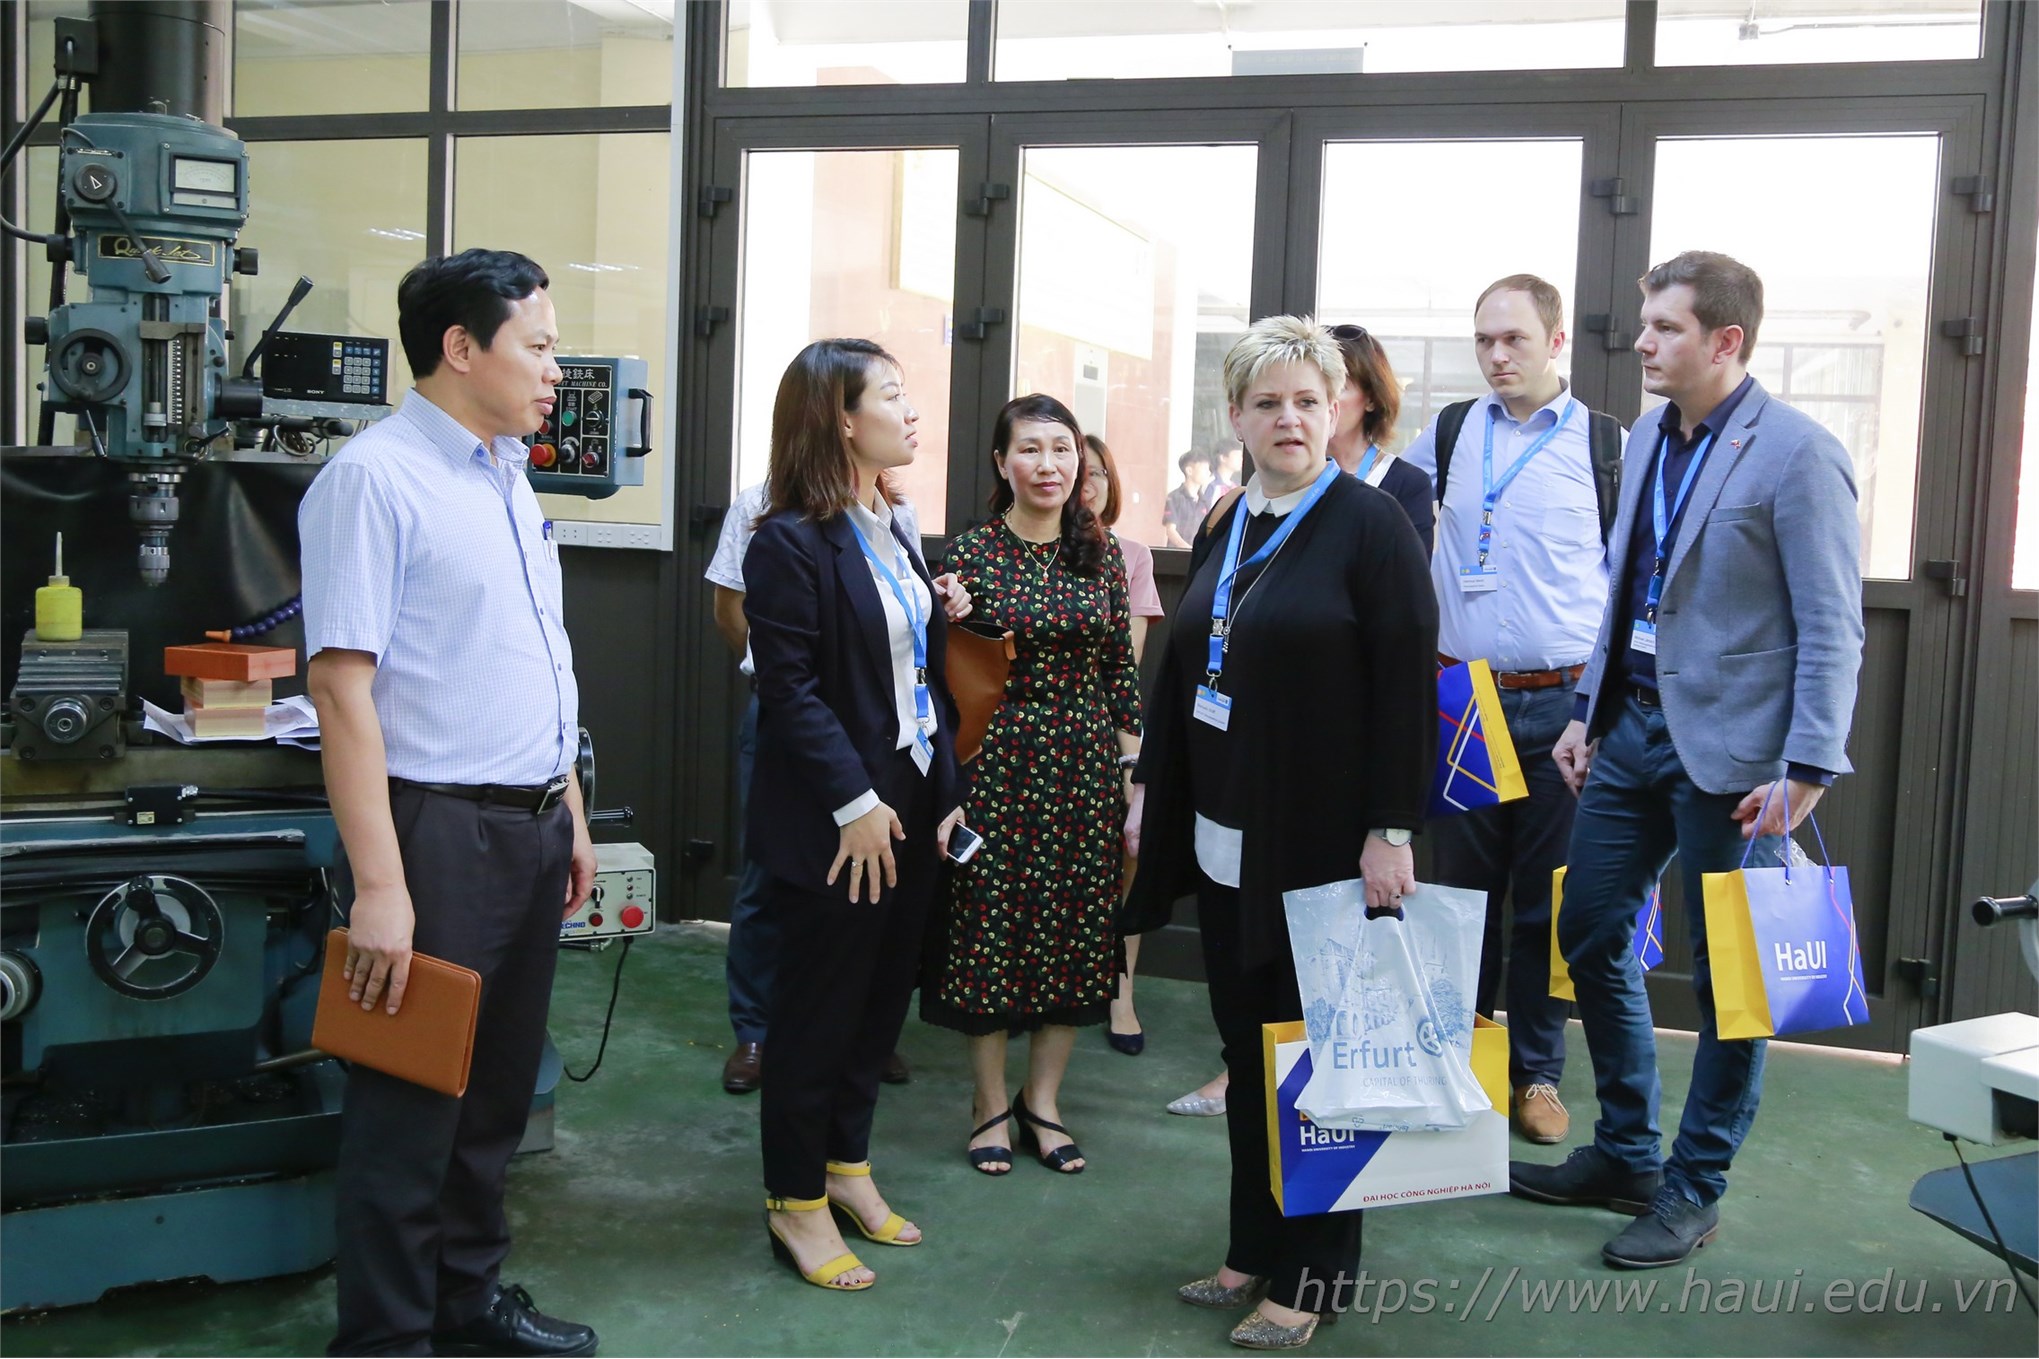 Business delegation of Thuringen, Germany paid a working visit to Hanoi University of Industry